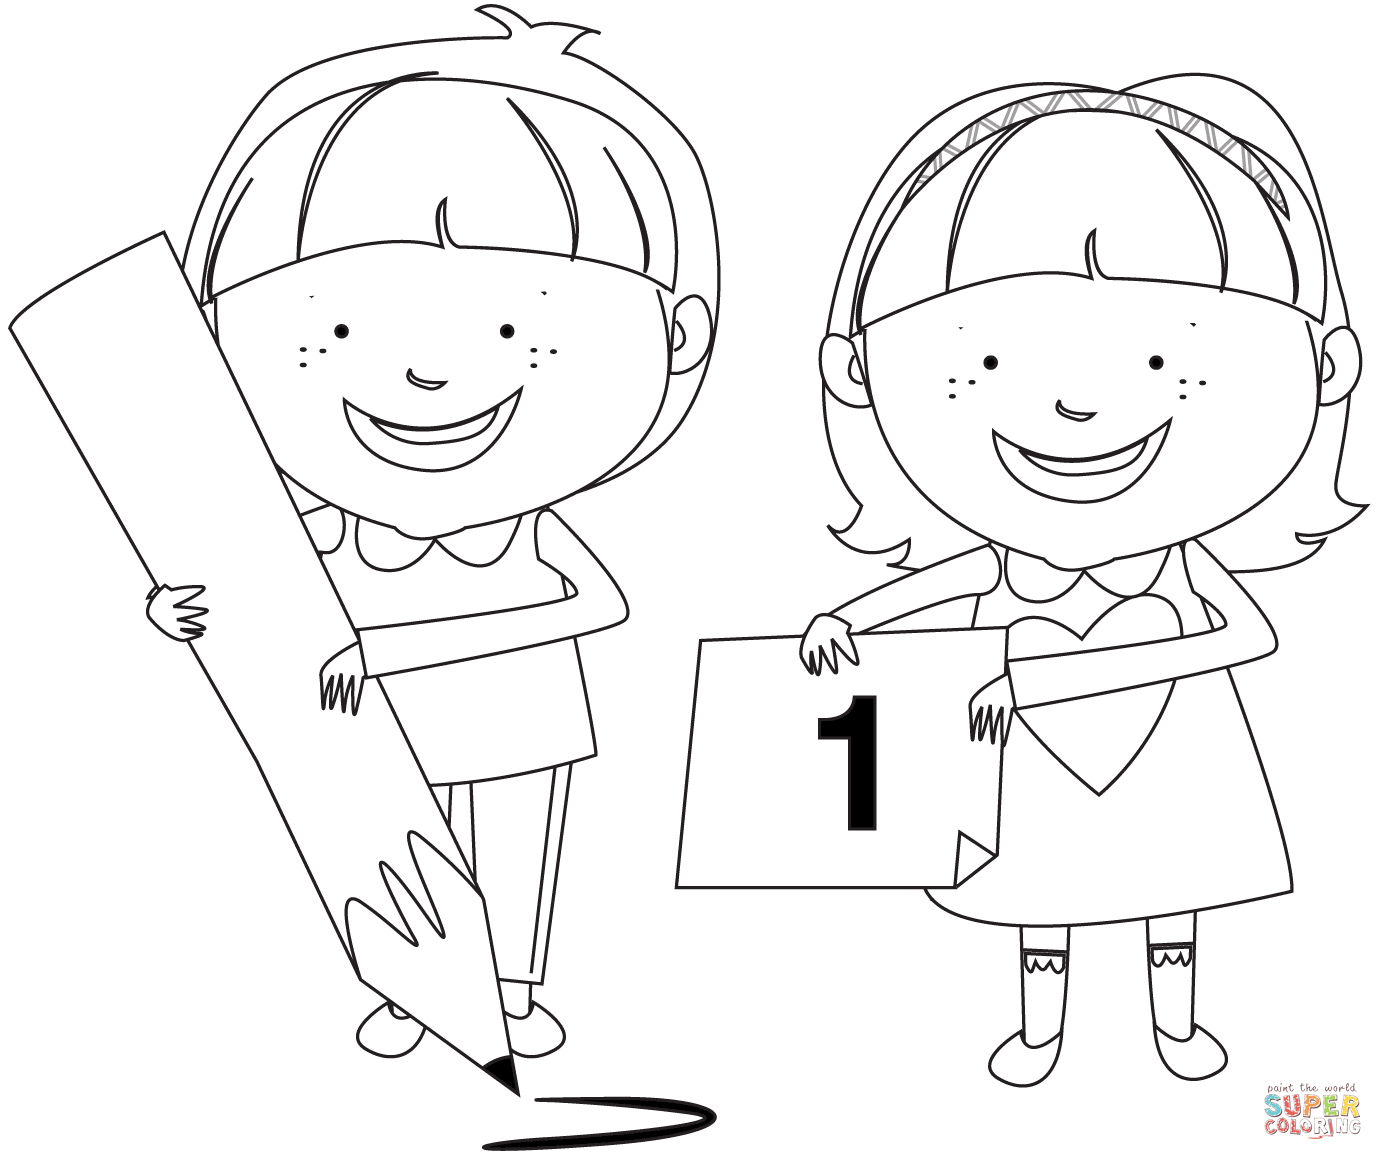 Children Preparing for School coloring page | Free Printable Coloring Pages